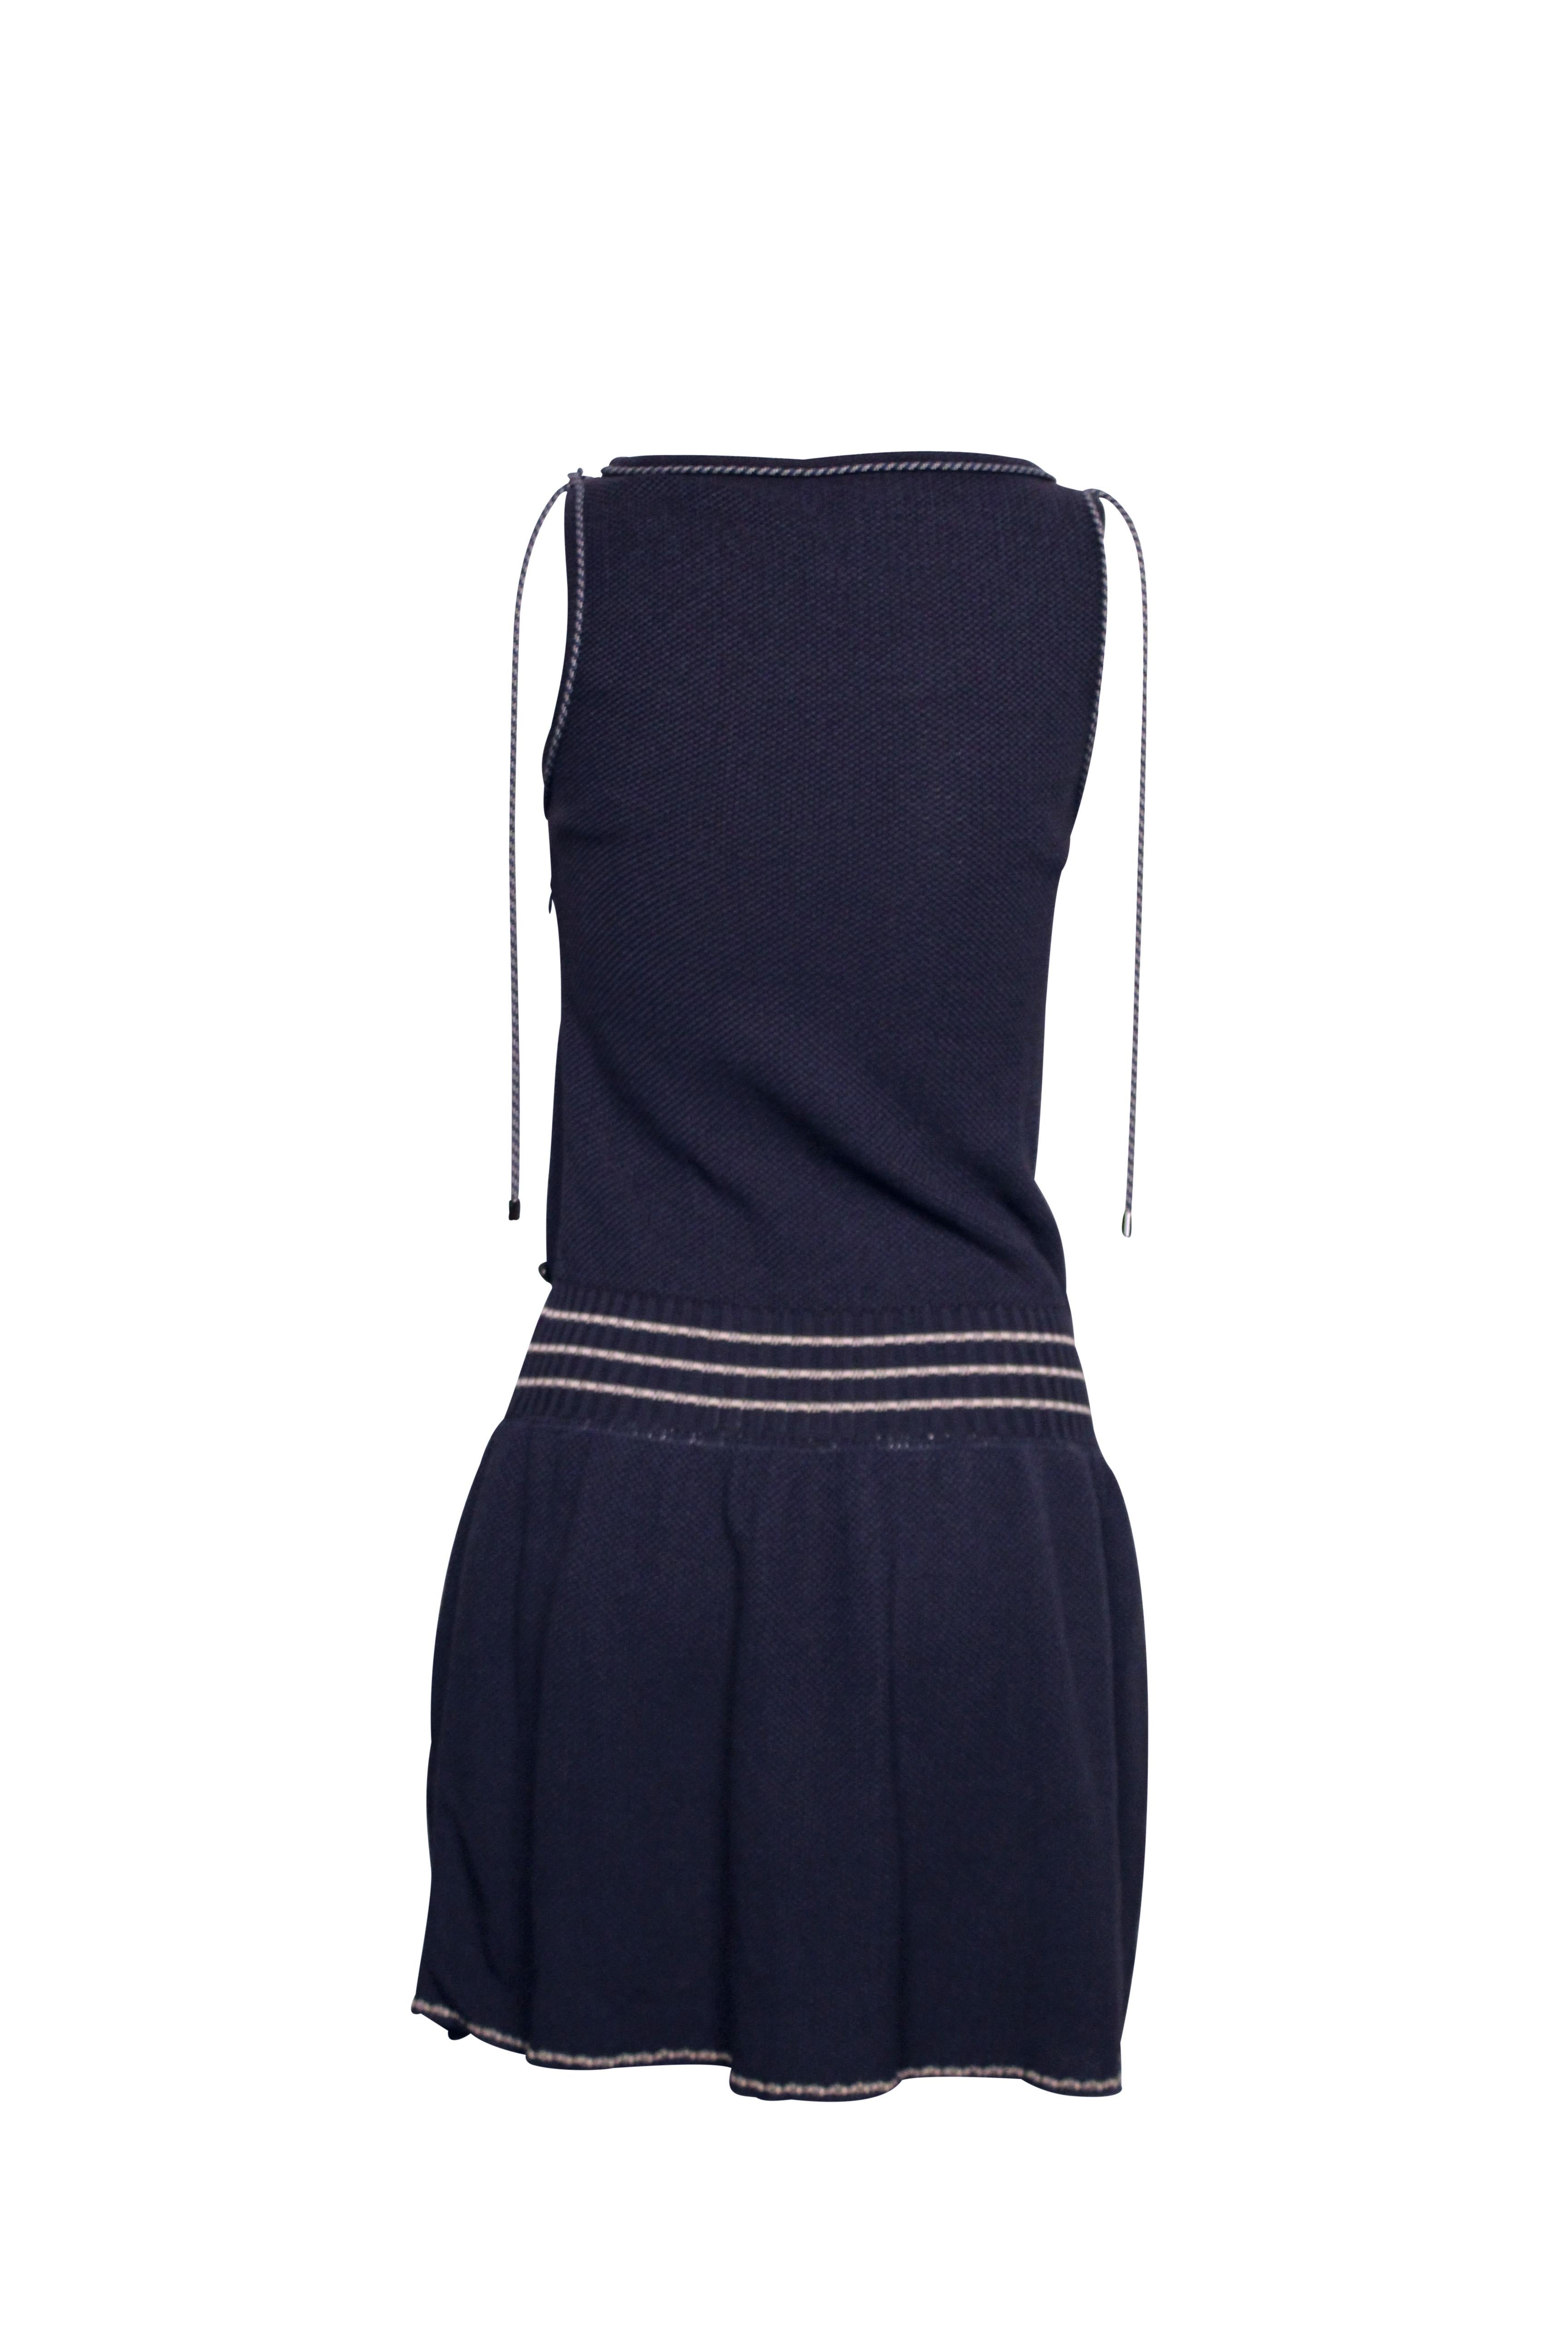 Women's CHANEL Navy and White Mini Dress For Sale